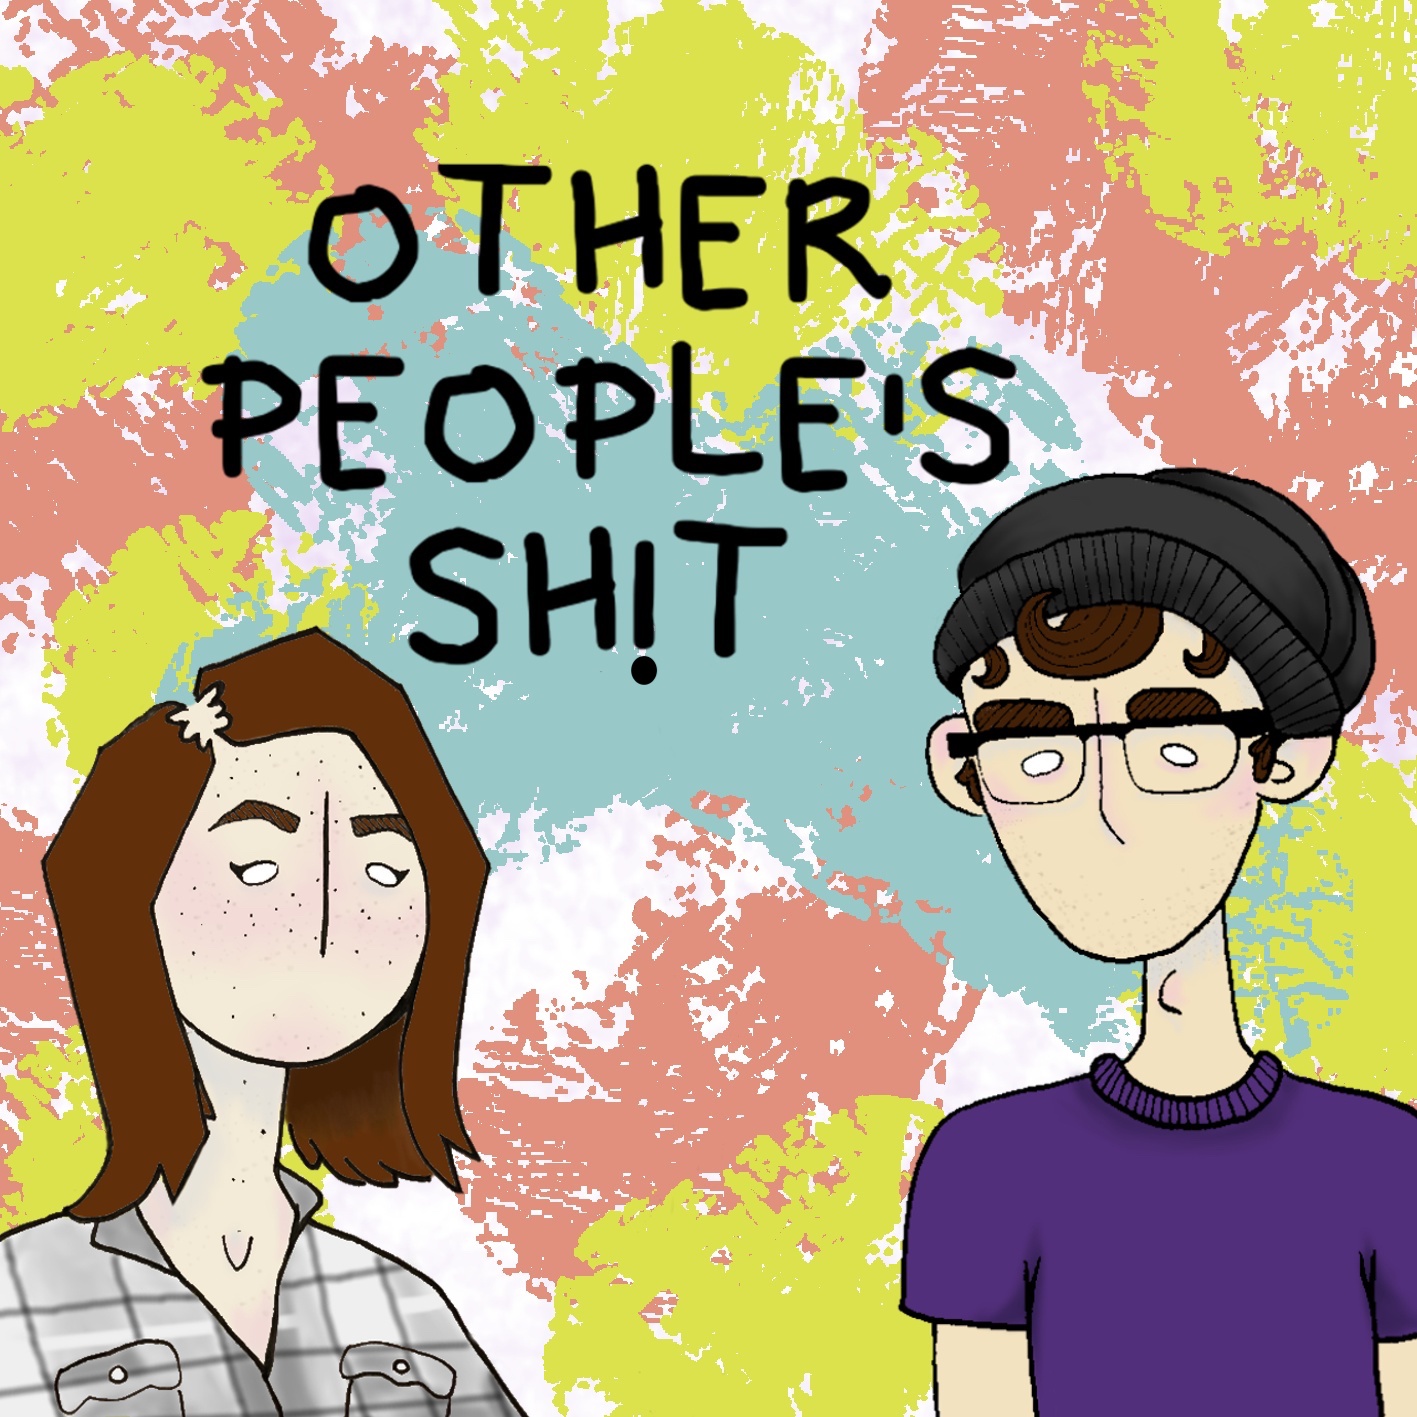 Other People's Sh!t